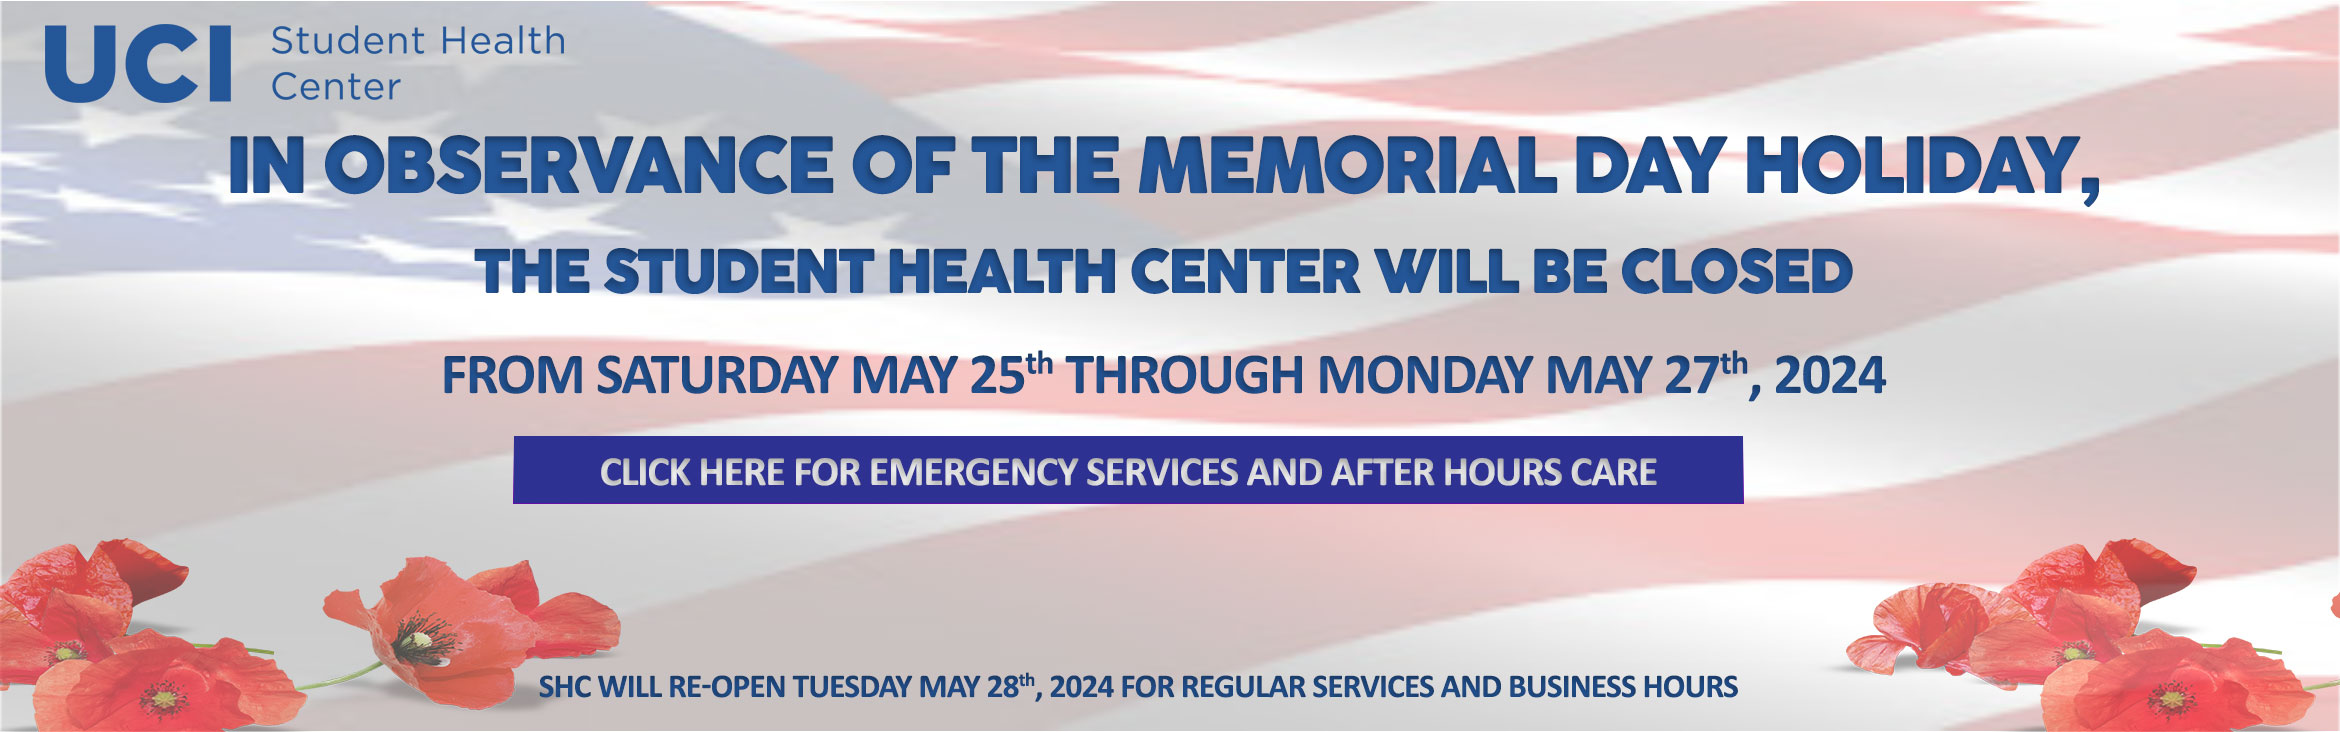 In Observance of the Memorial Day Holiday, the Student Health Center will be closed from Saturday, May 25th through Monday May 27th, 2024. We will reopen for regular services and business hours on Tuesday, May 28th, 2024. 